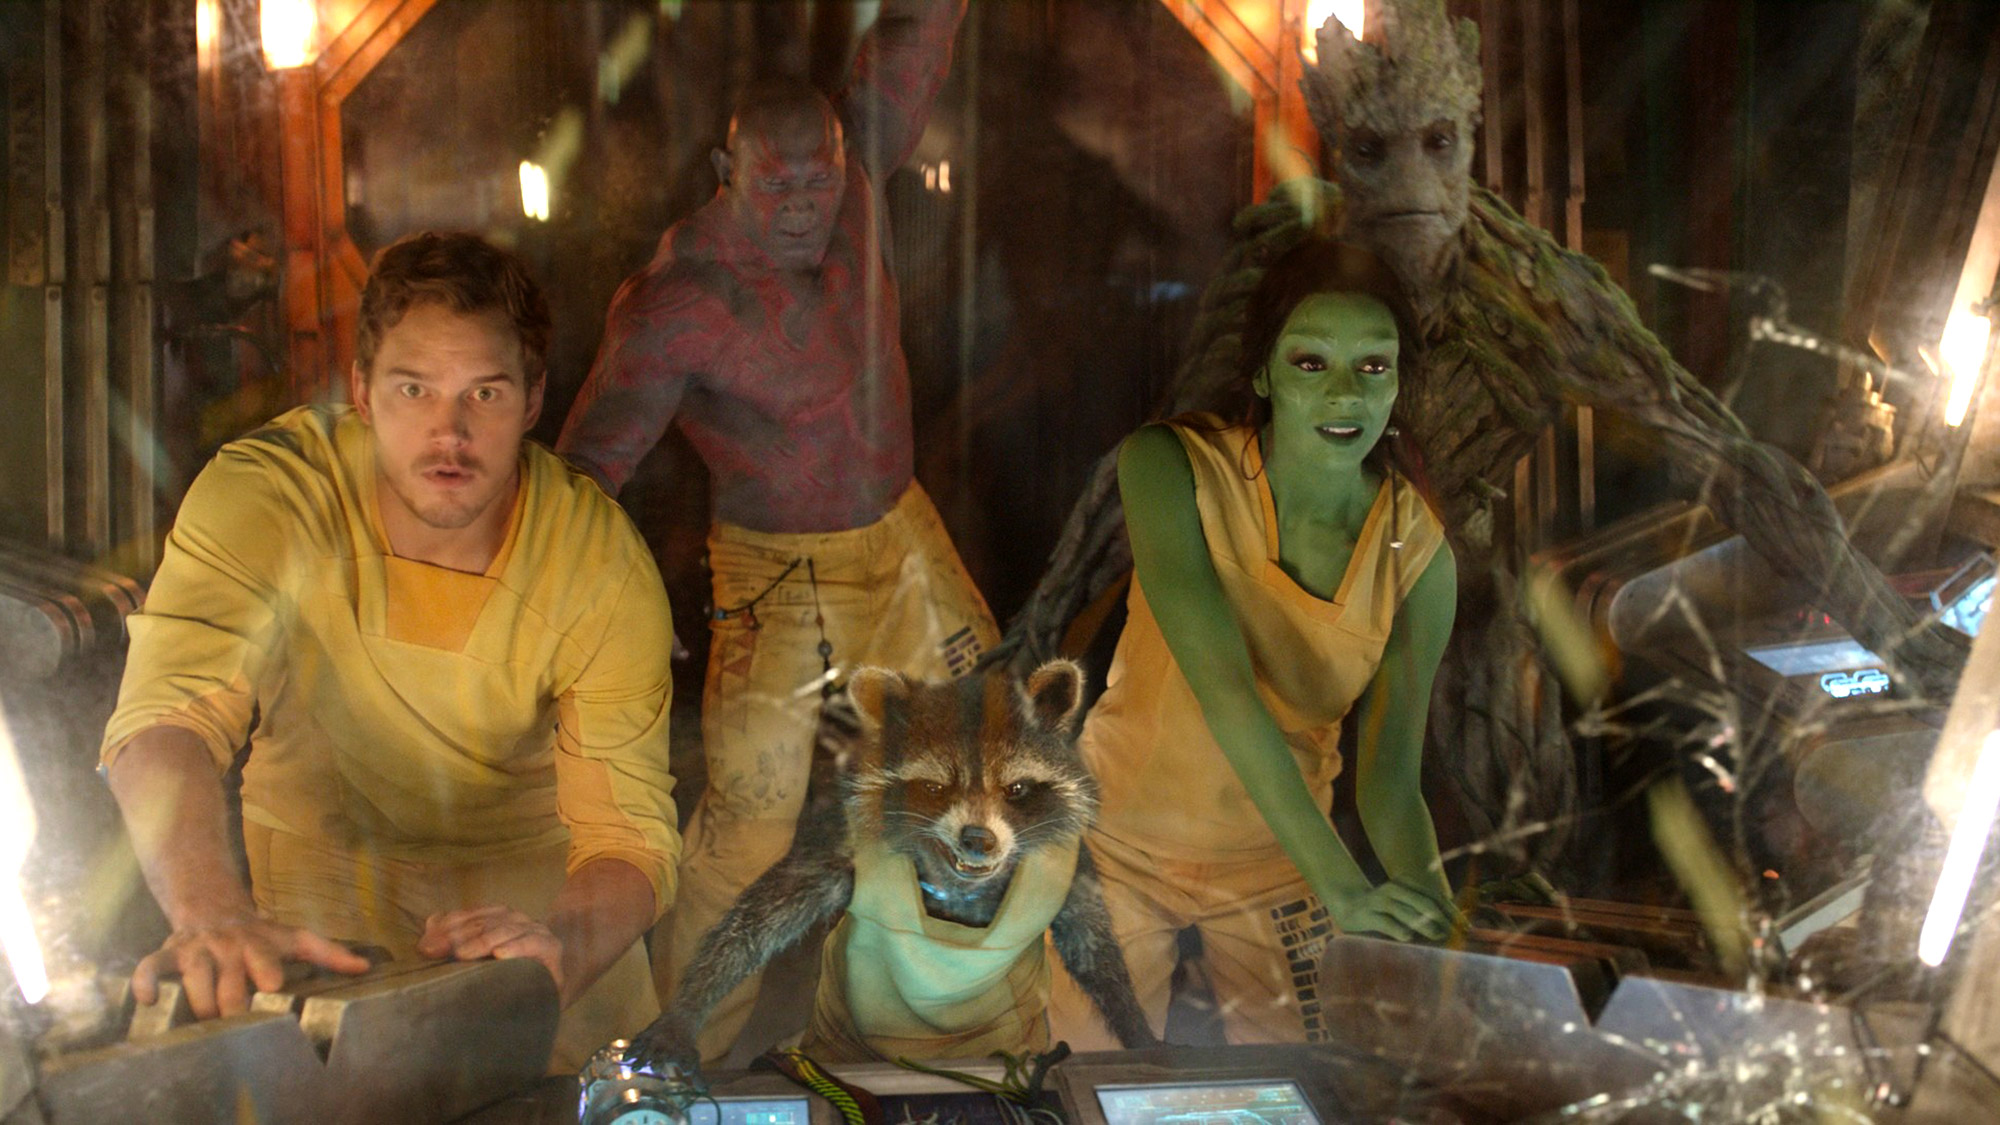 The cast of The Guardians of the Galaxy